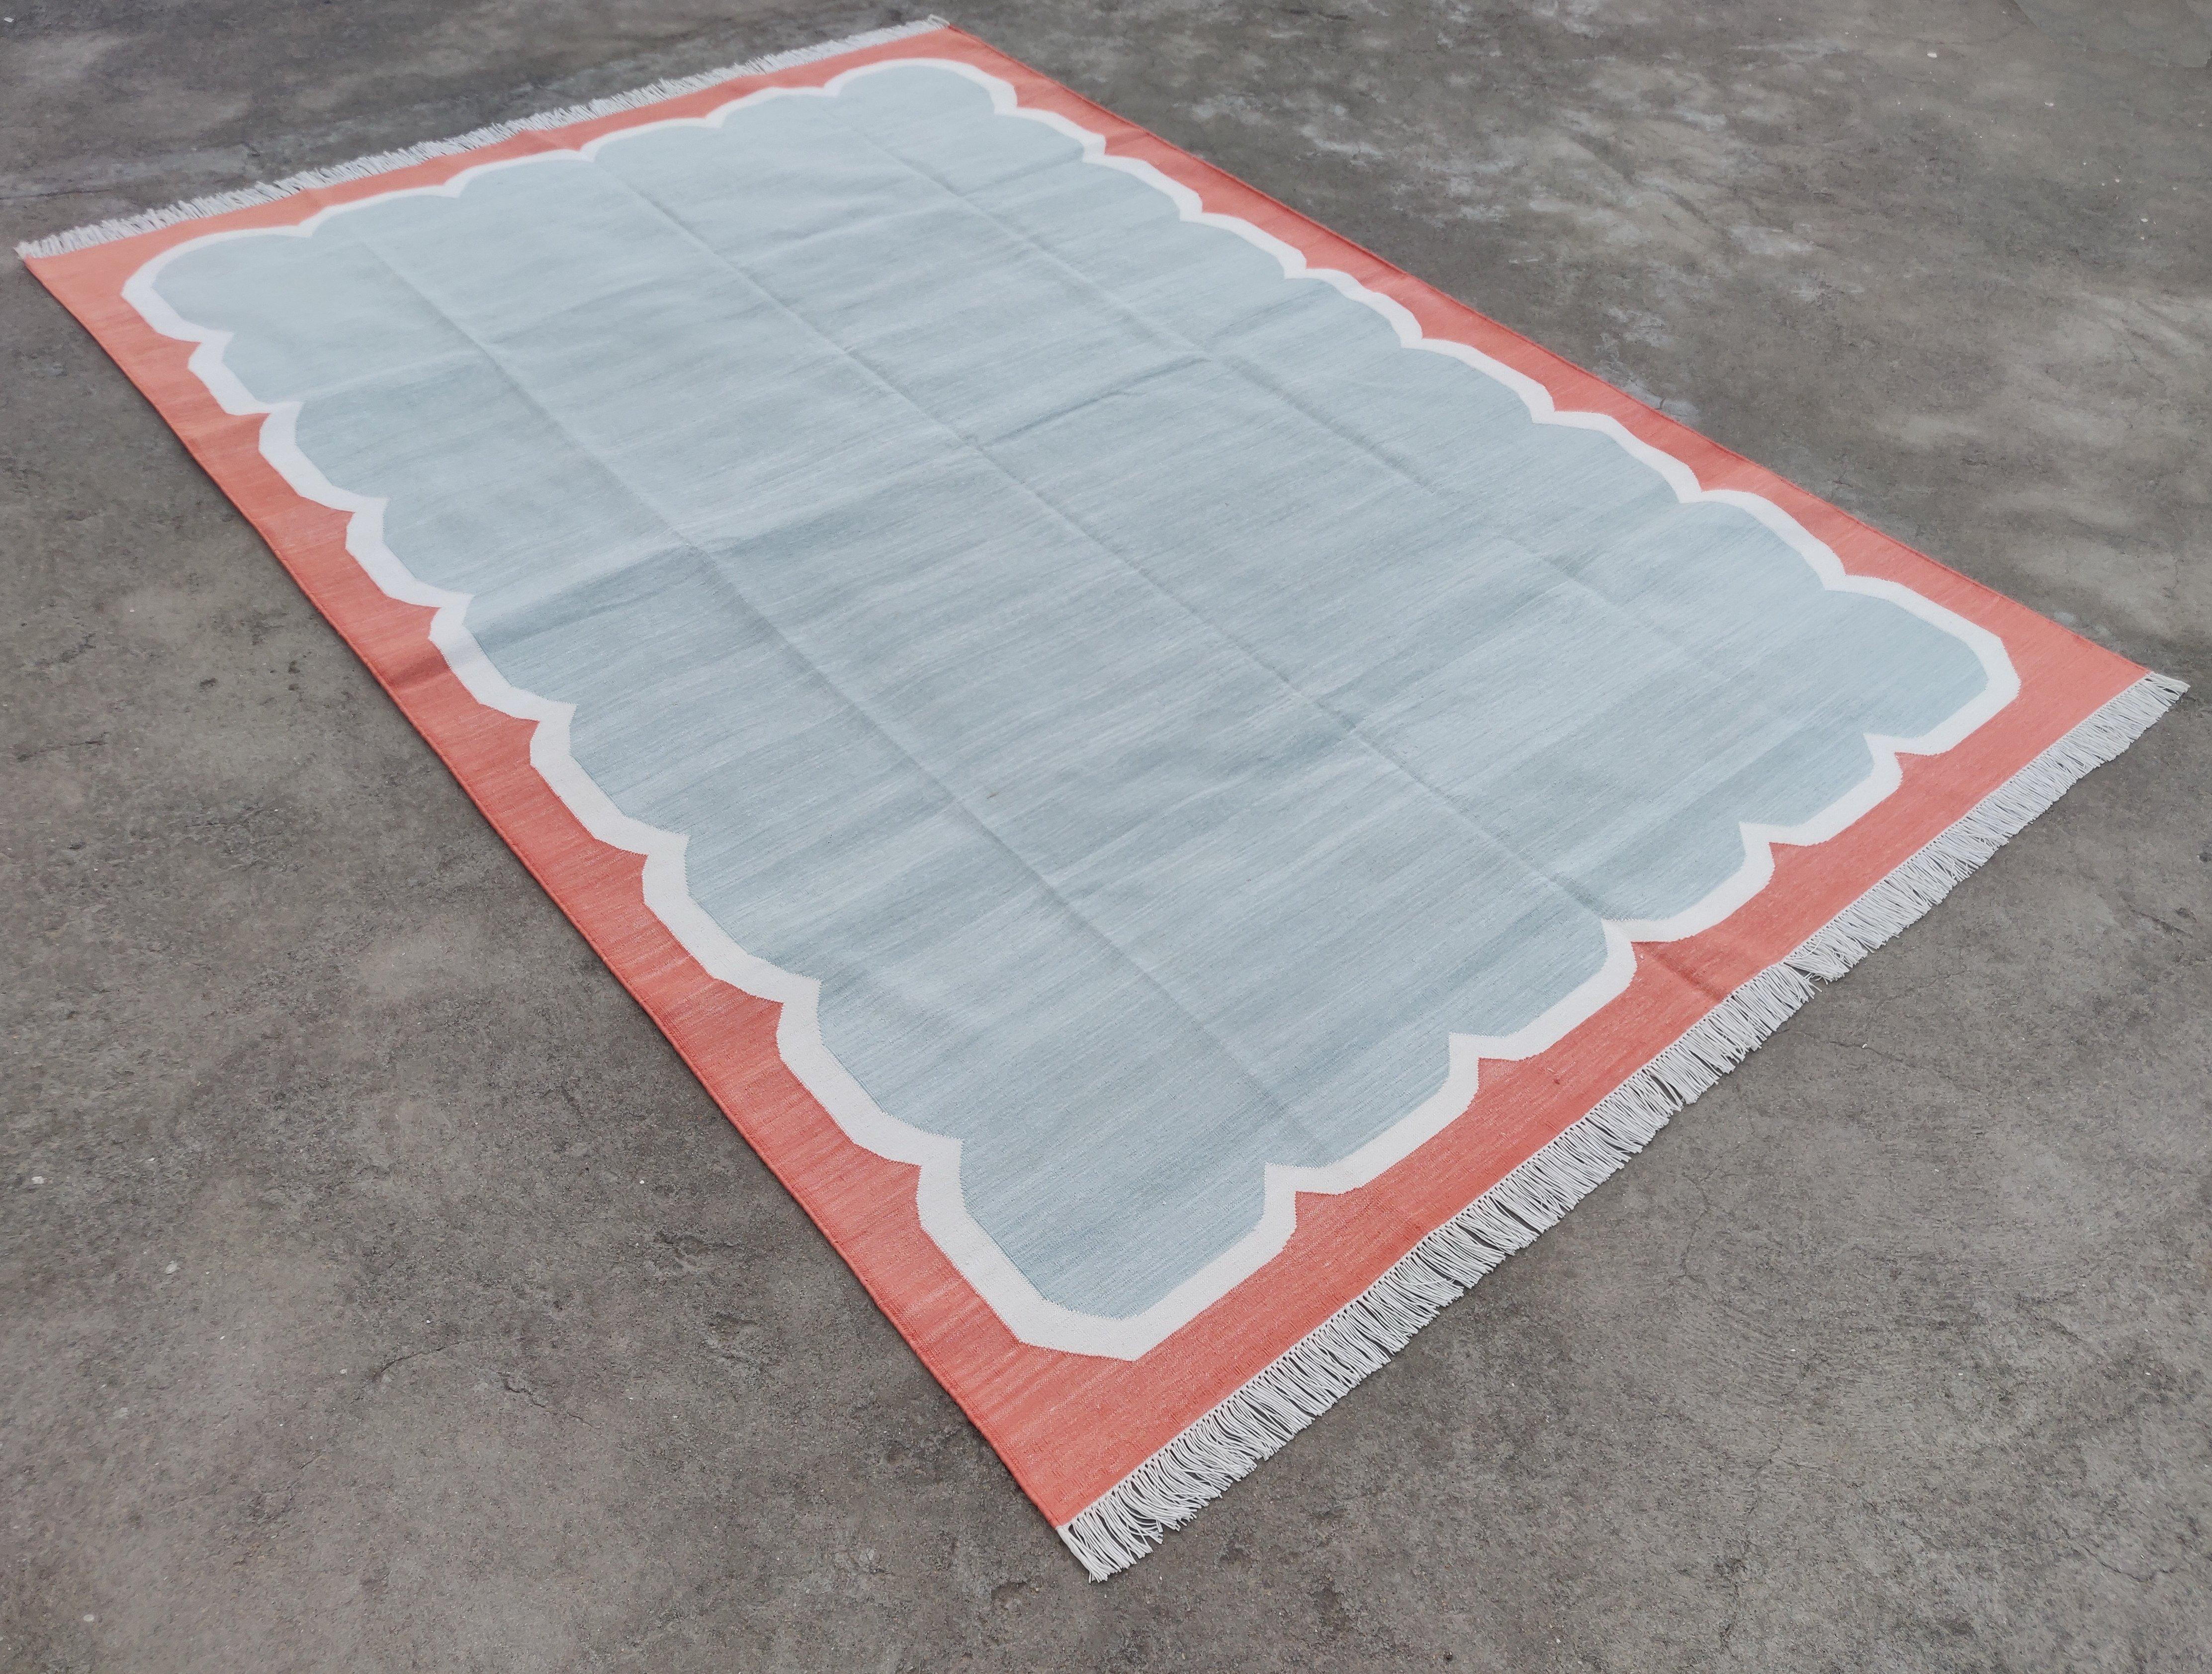 Cotton Vegetable Dyed Pale Aqua, Cream And Coral Scalloped Striped Indian Dhurrie Rug- 6'x9' (180x270cm) 

These special flat-weave dhurries are hand-woven with 15 ply 100% cotton yarn. Due to the special manufacturing techniques used to create our